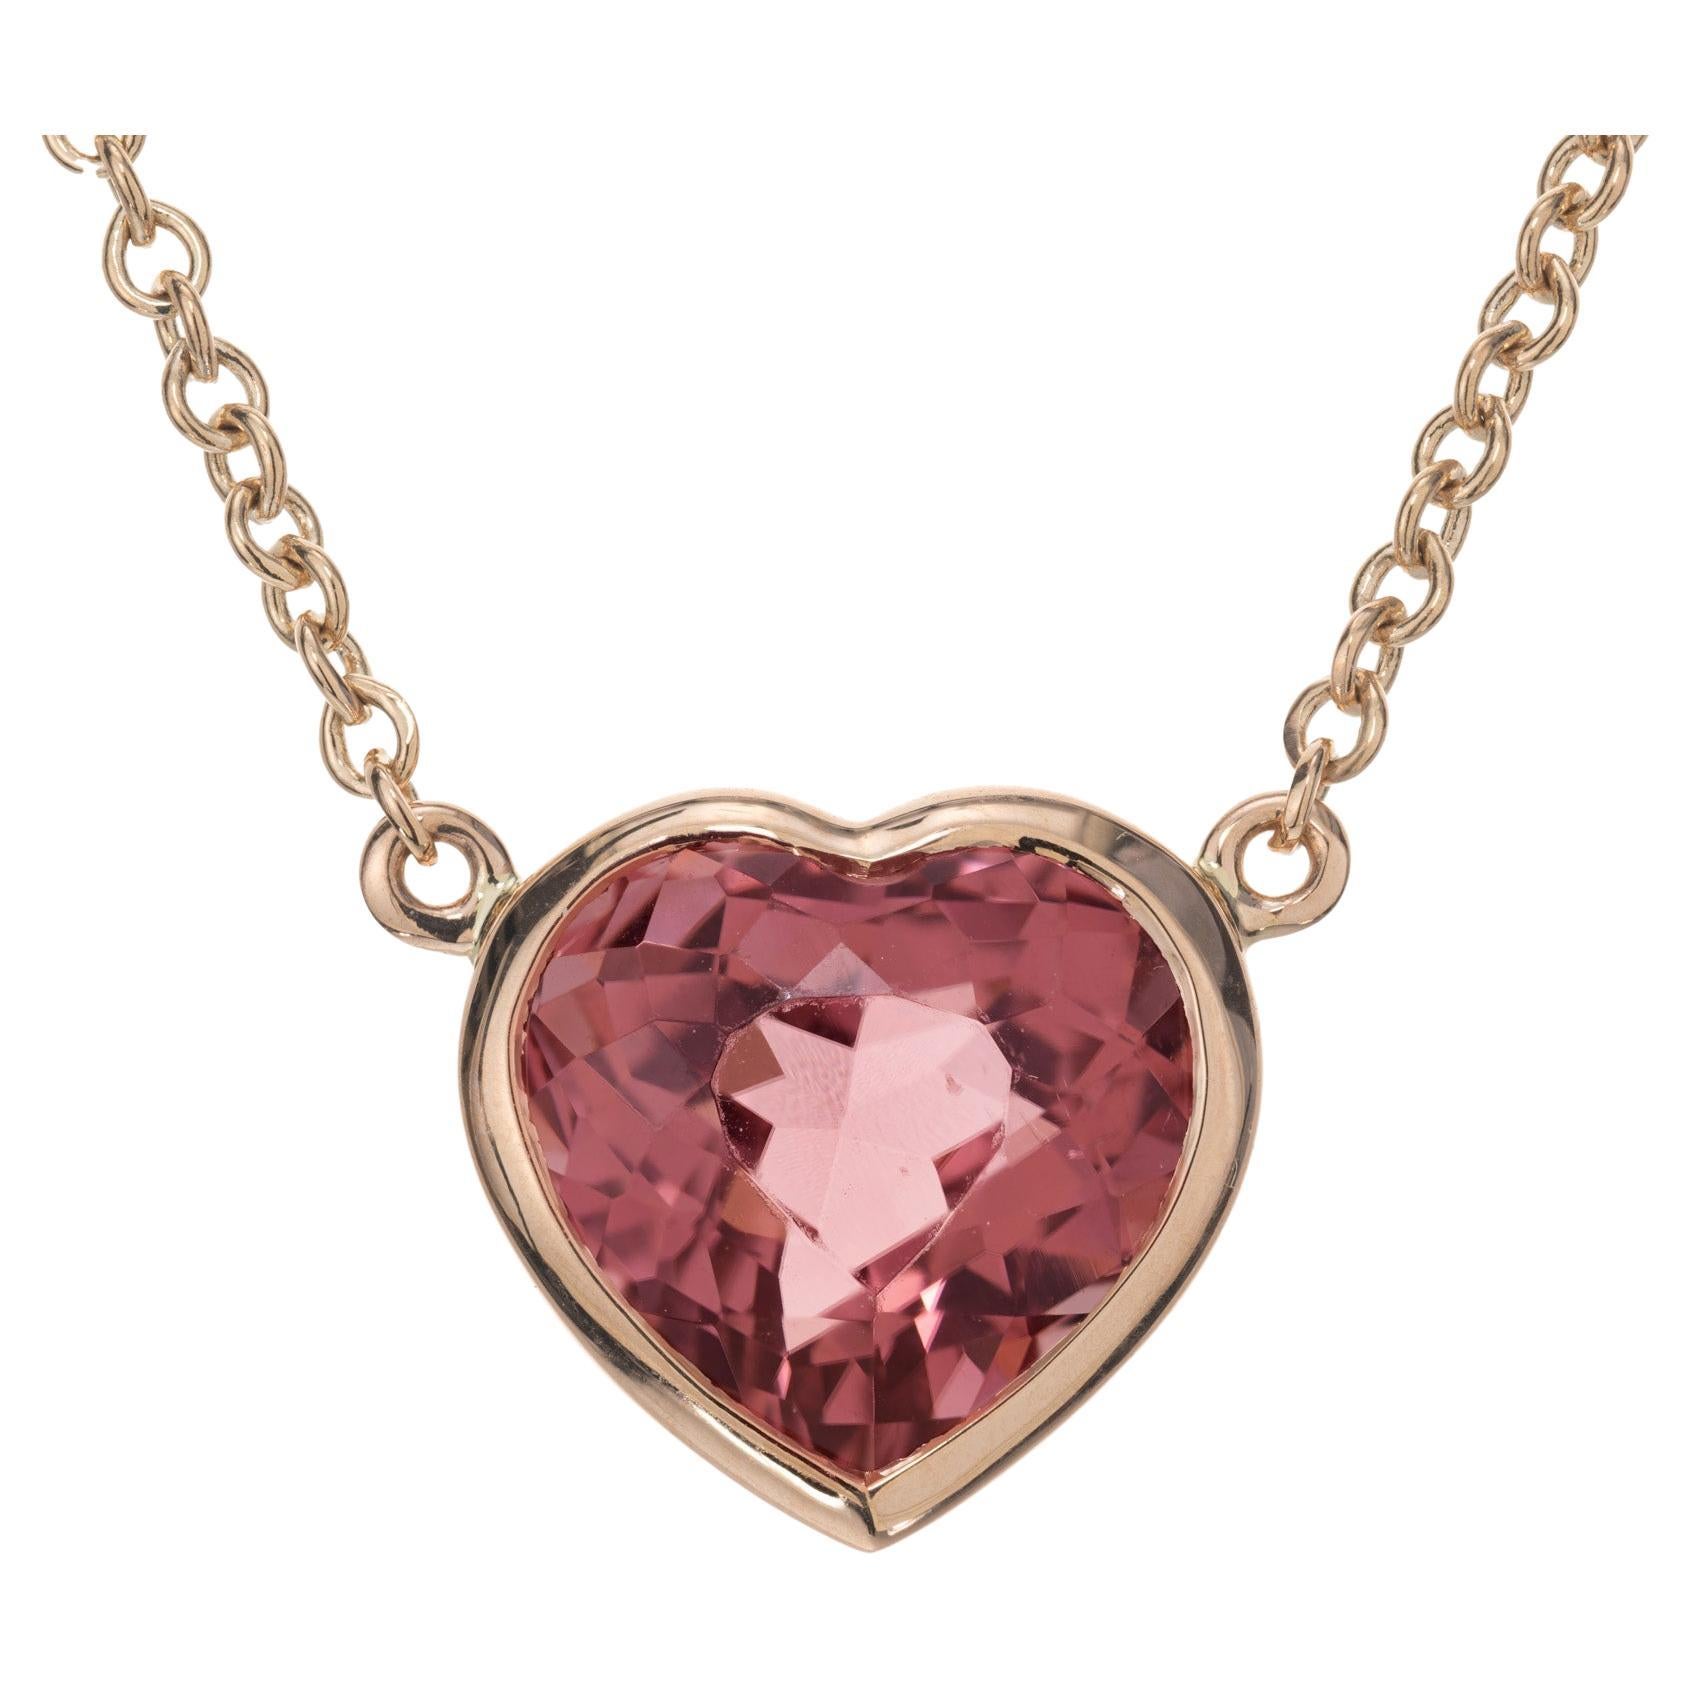 Bright pink tourmaline pendant necklace. 3.29 carat heart shaped tourmaline bezel set pendant in 18k rose gold. 17 inch 18k rose gold chain. Designed and crafted in the Peter Suchy Workshop.
Follow us on our 1stdibs storefront to view our weekly new